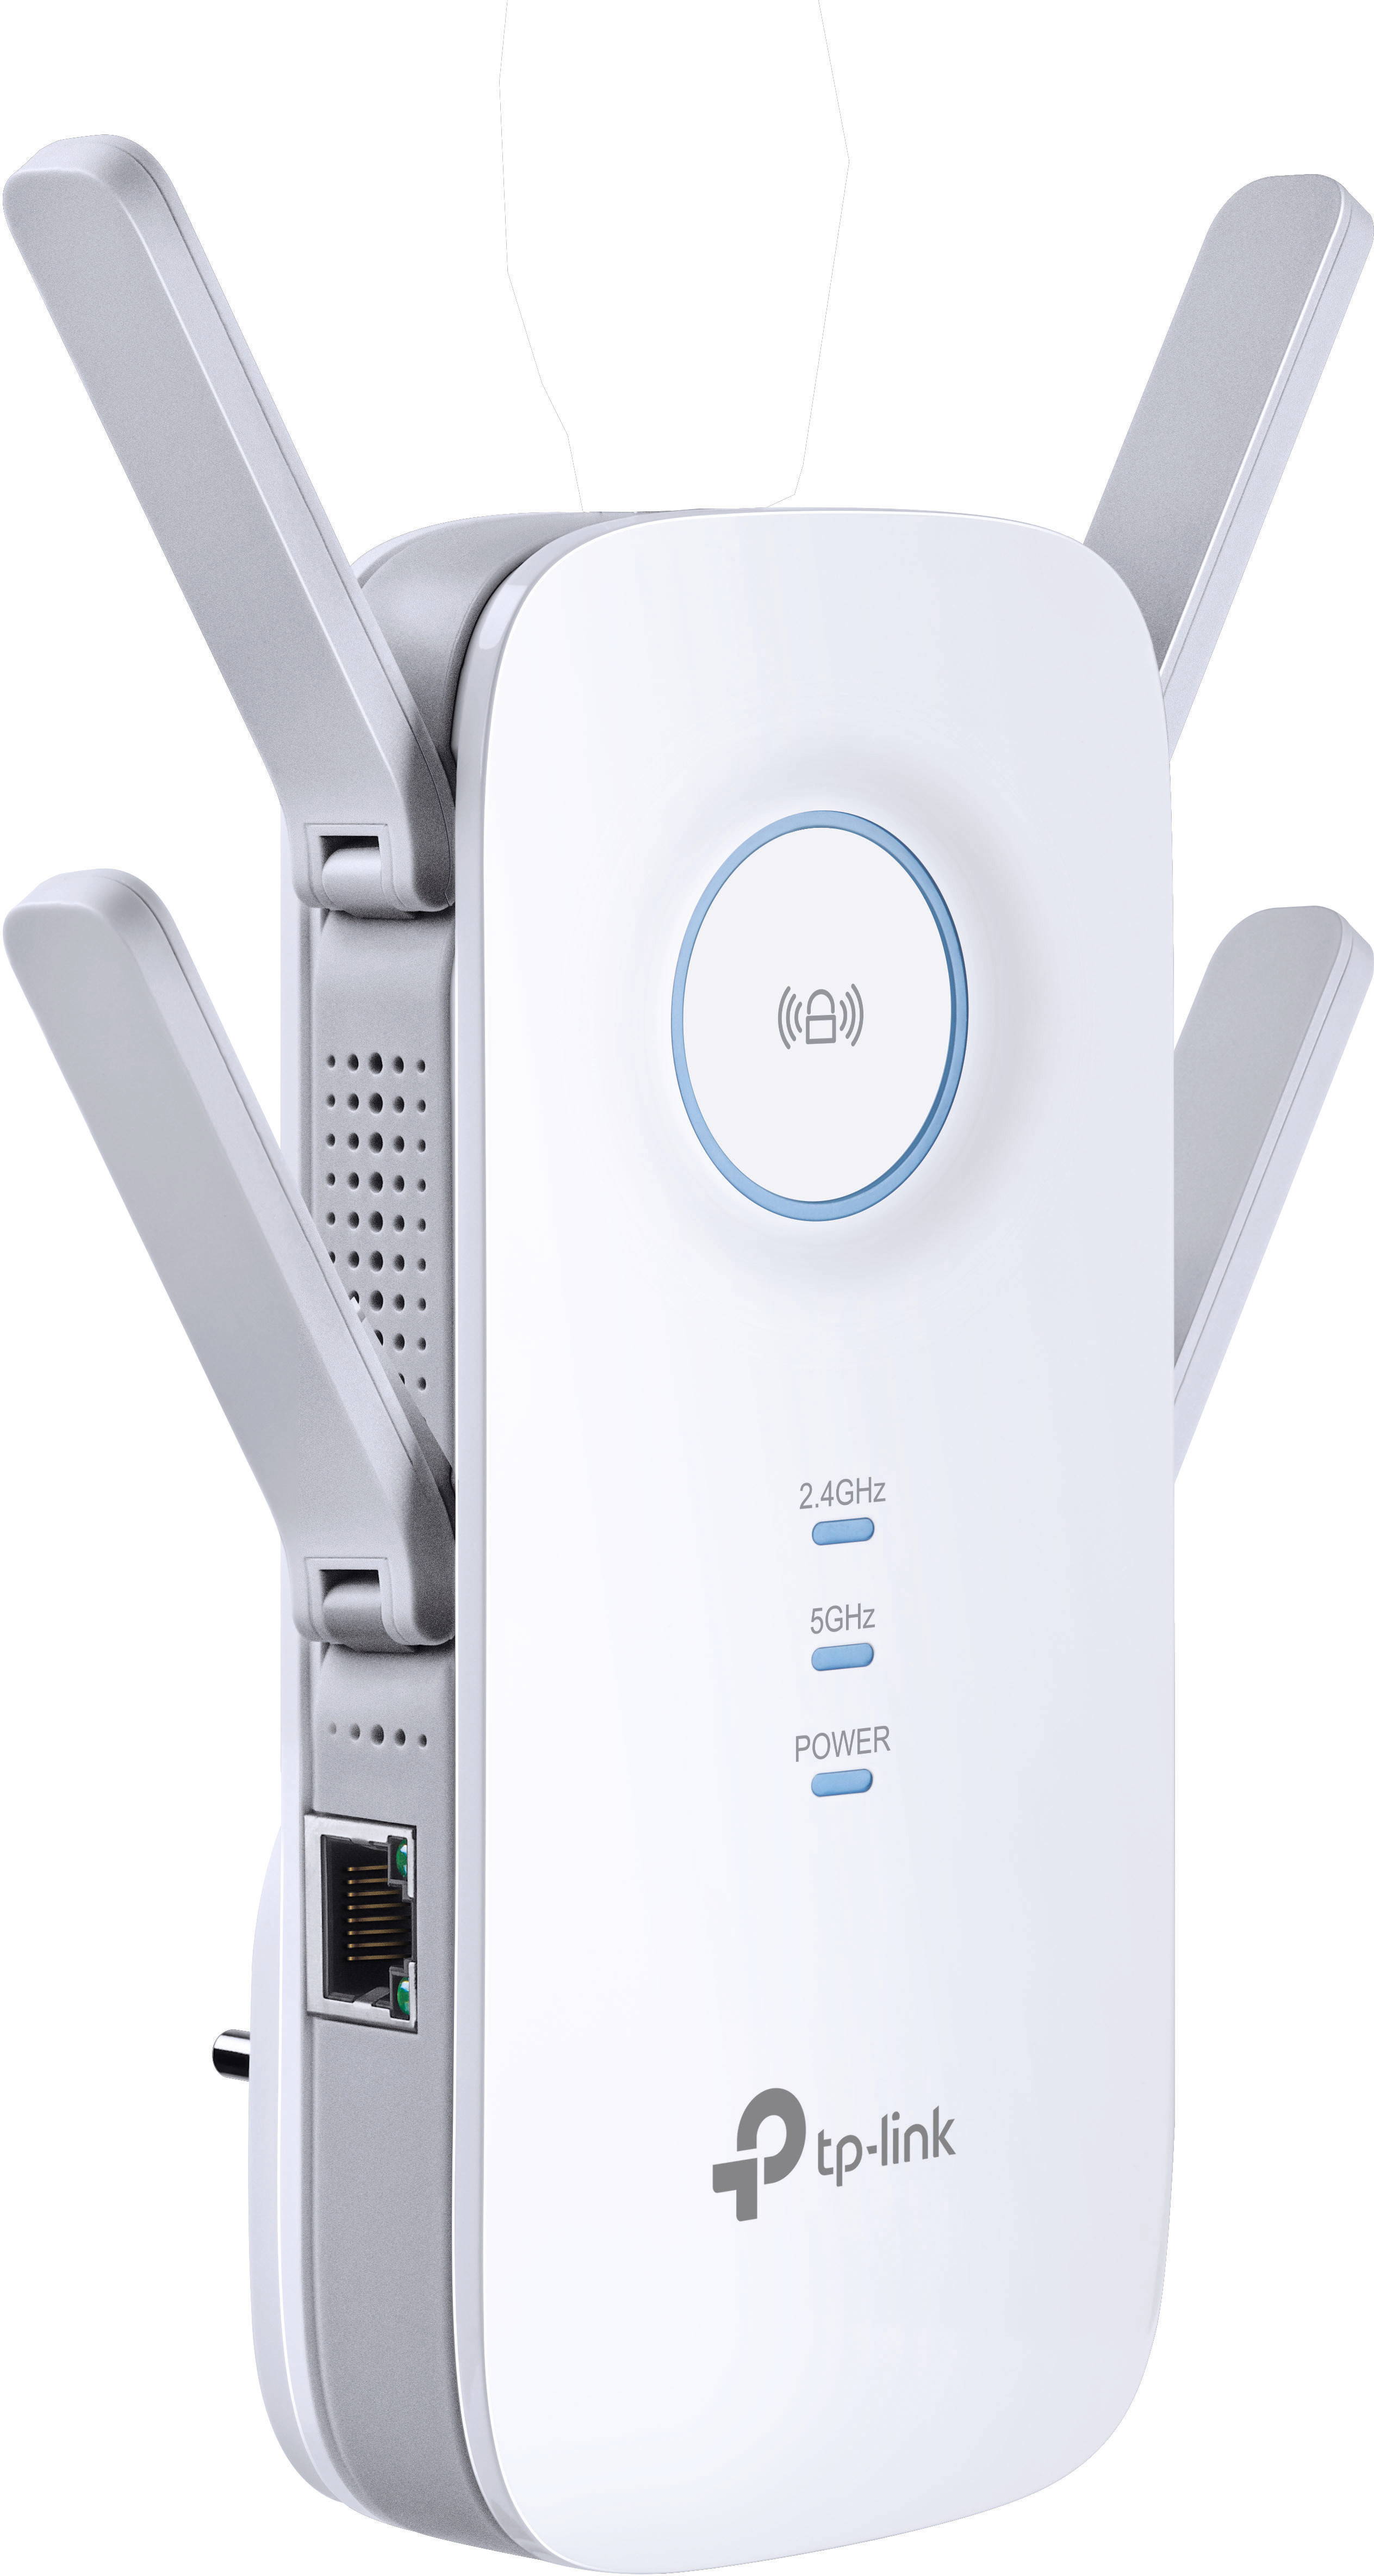 TP-LINK RE650 WLAN Repeater AC2600